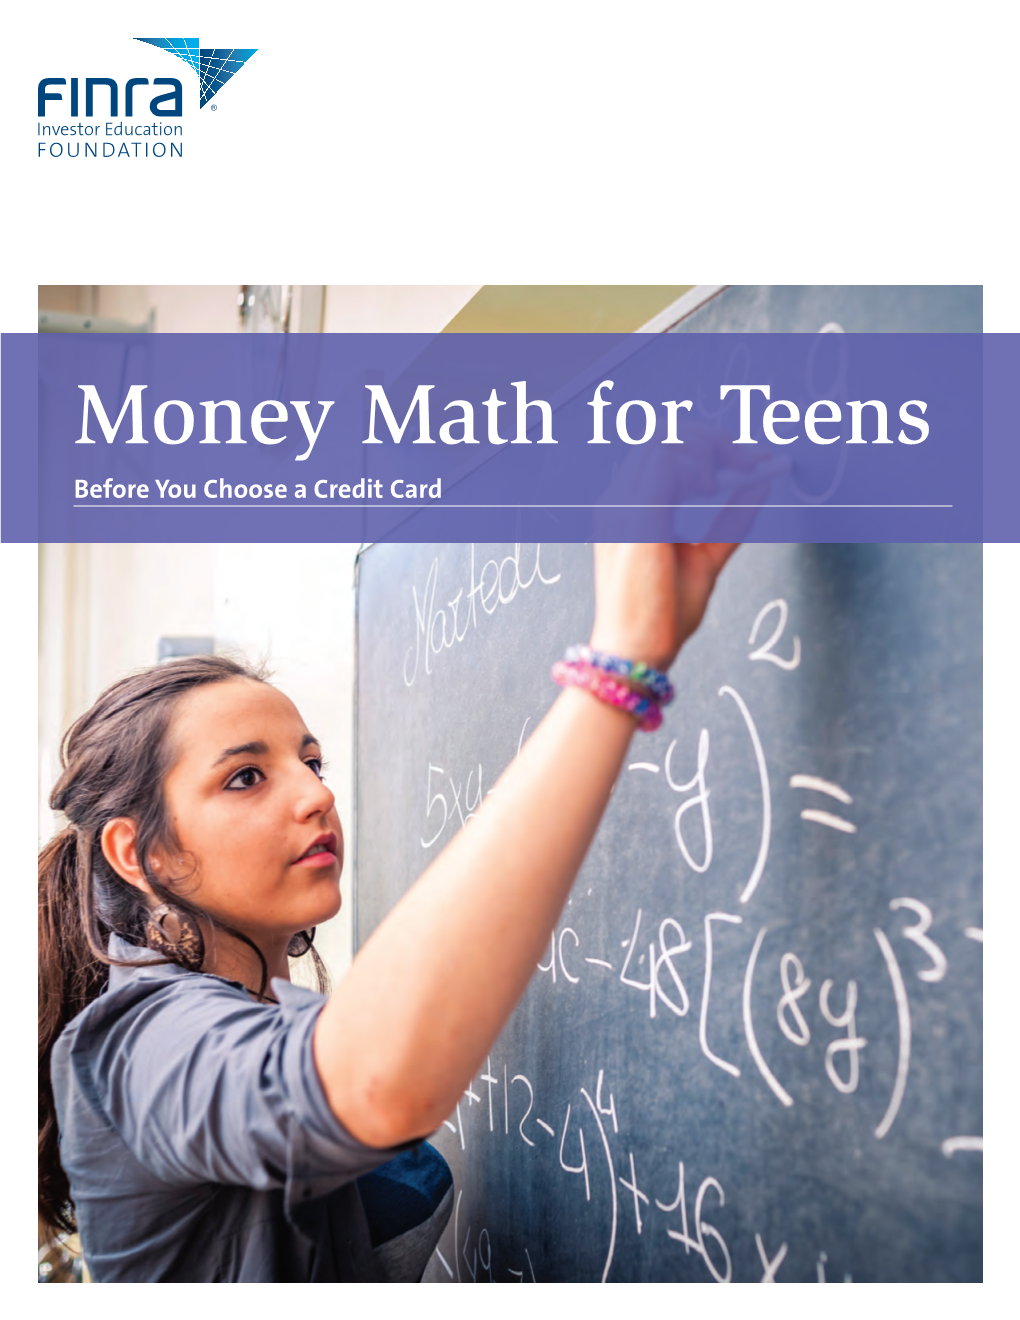 Money Math for Teens: Before You Choose a Credit Card